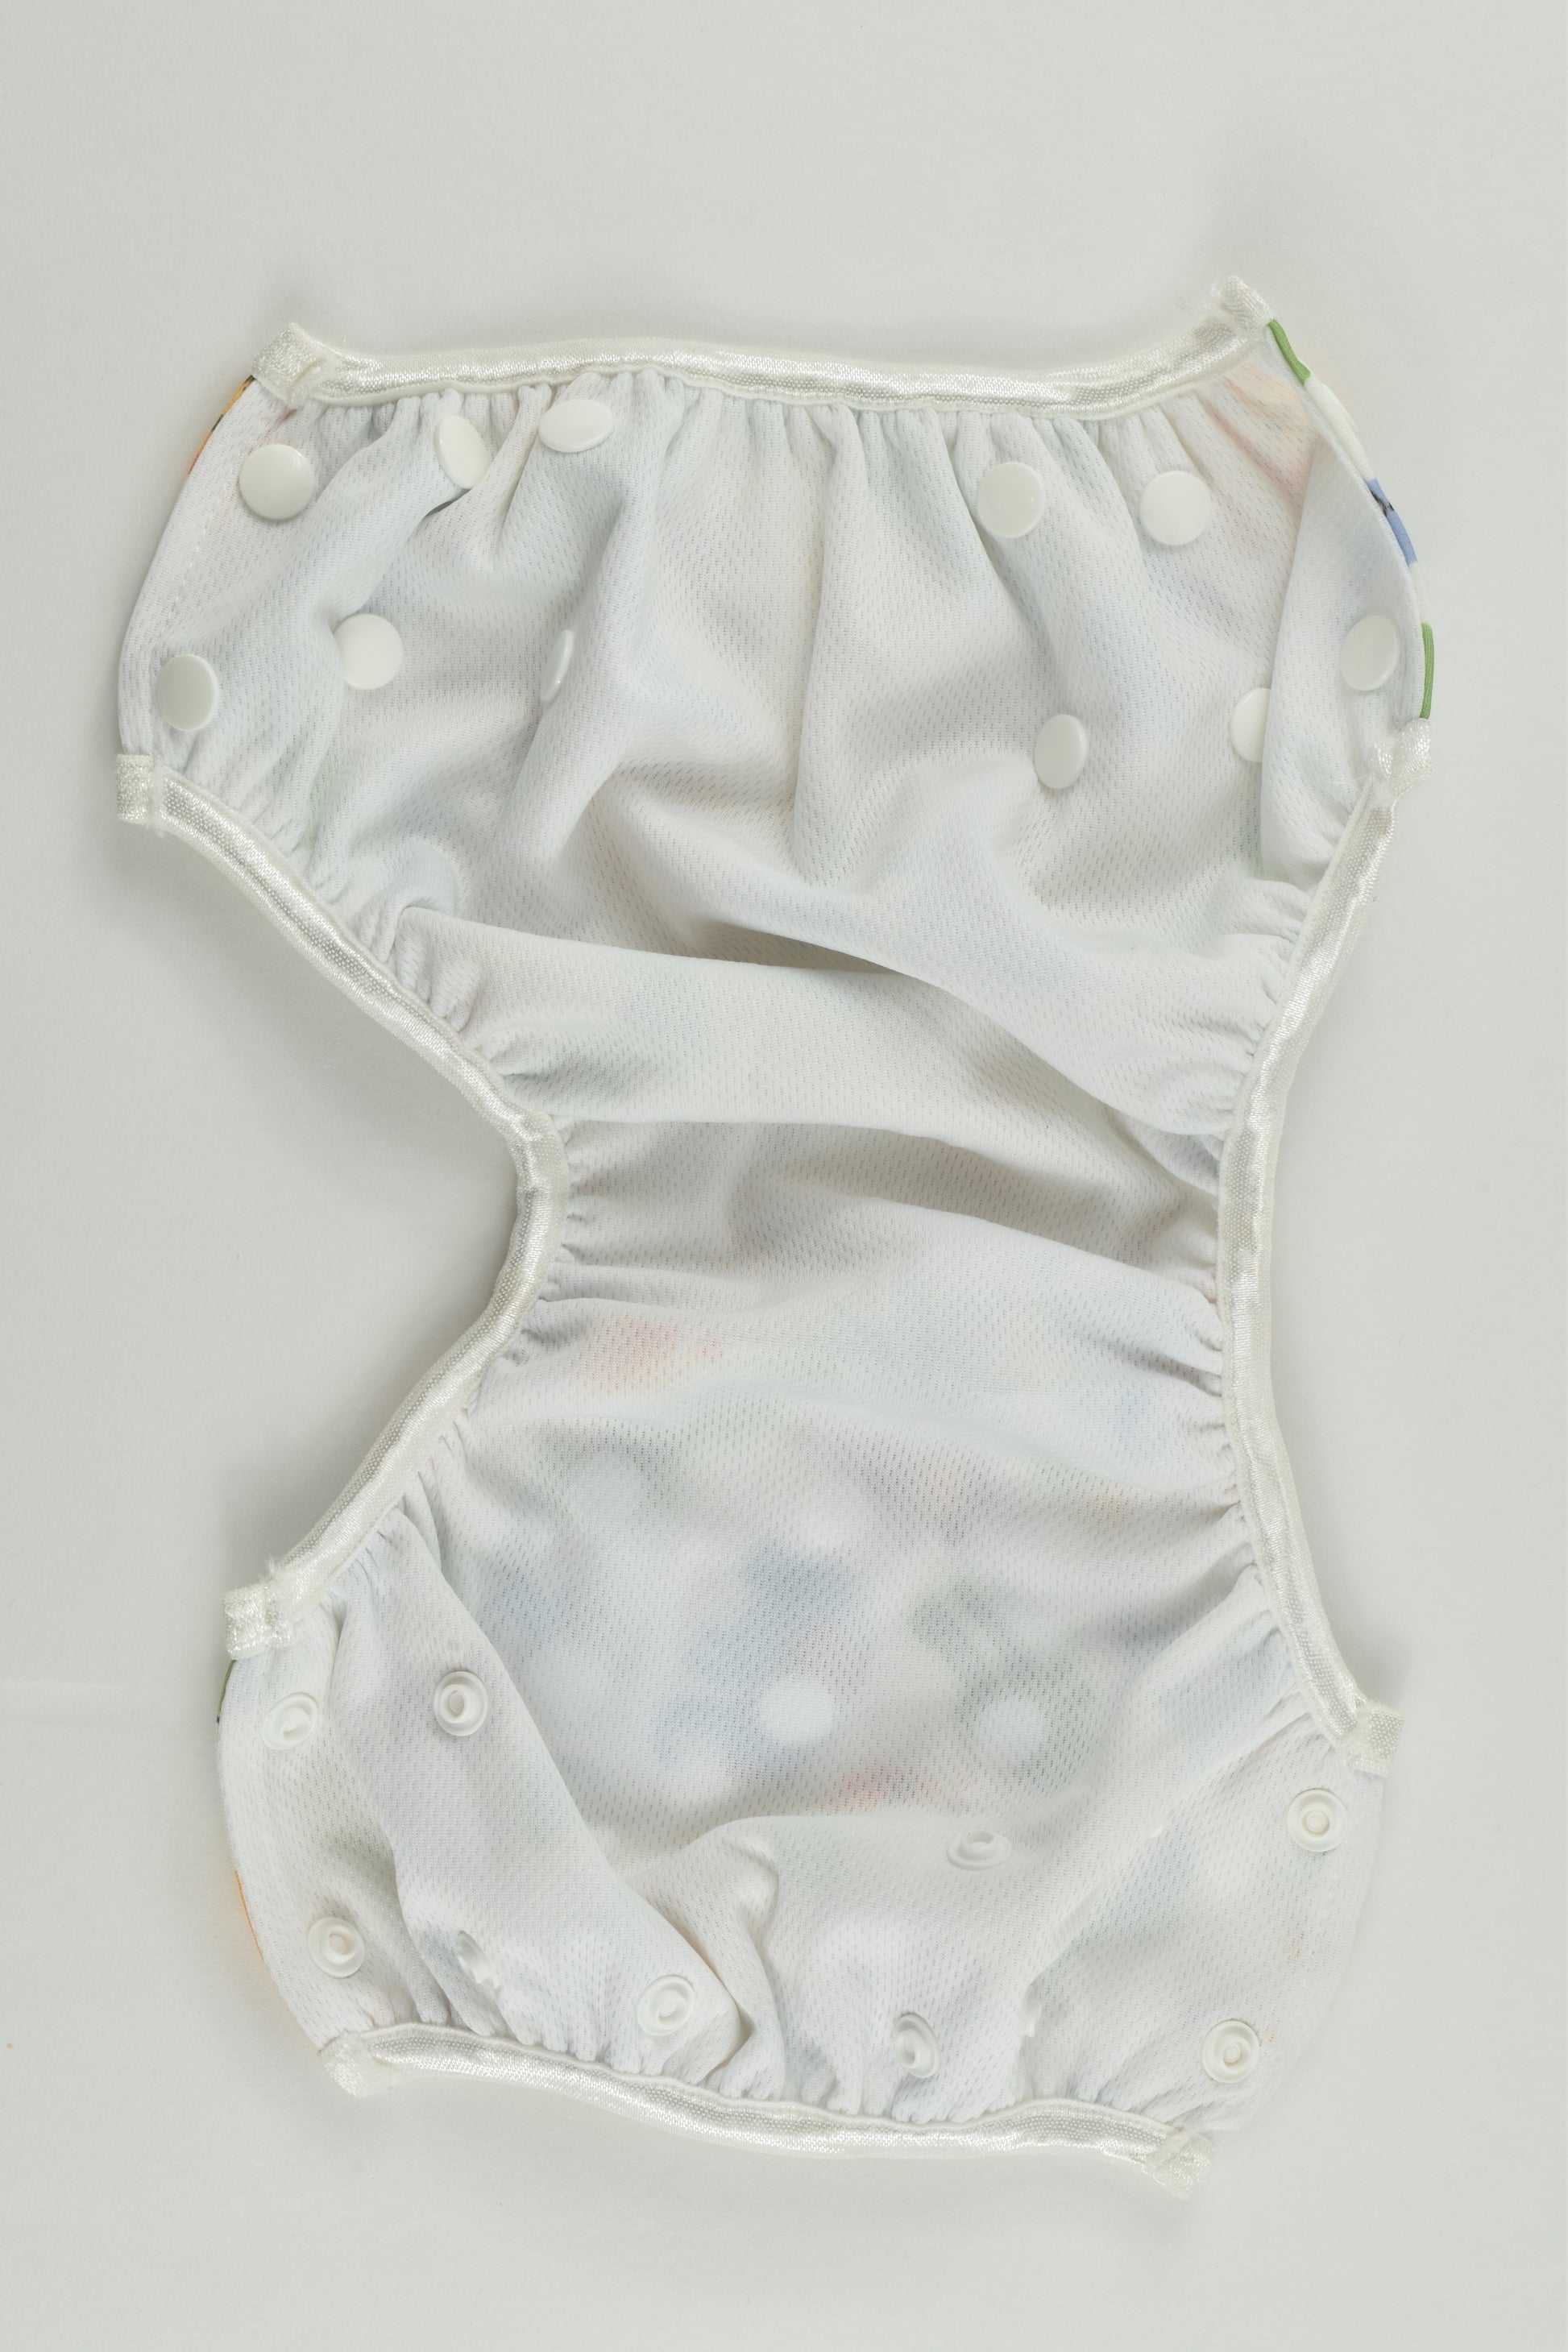 NEW Brand Unknown Size approx 0-2 Animals Reusable Swim Nappy